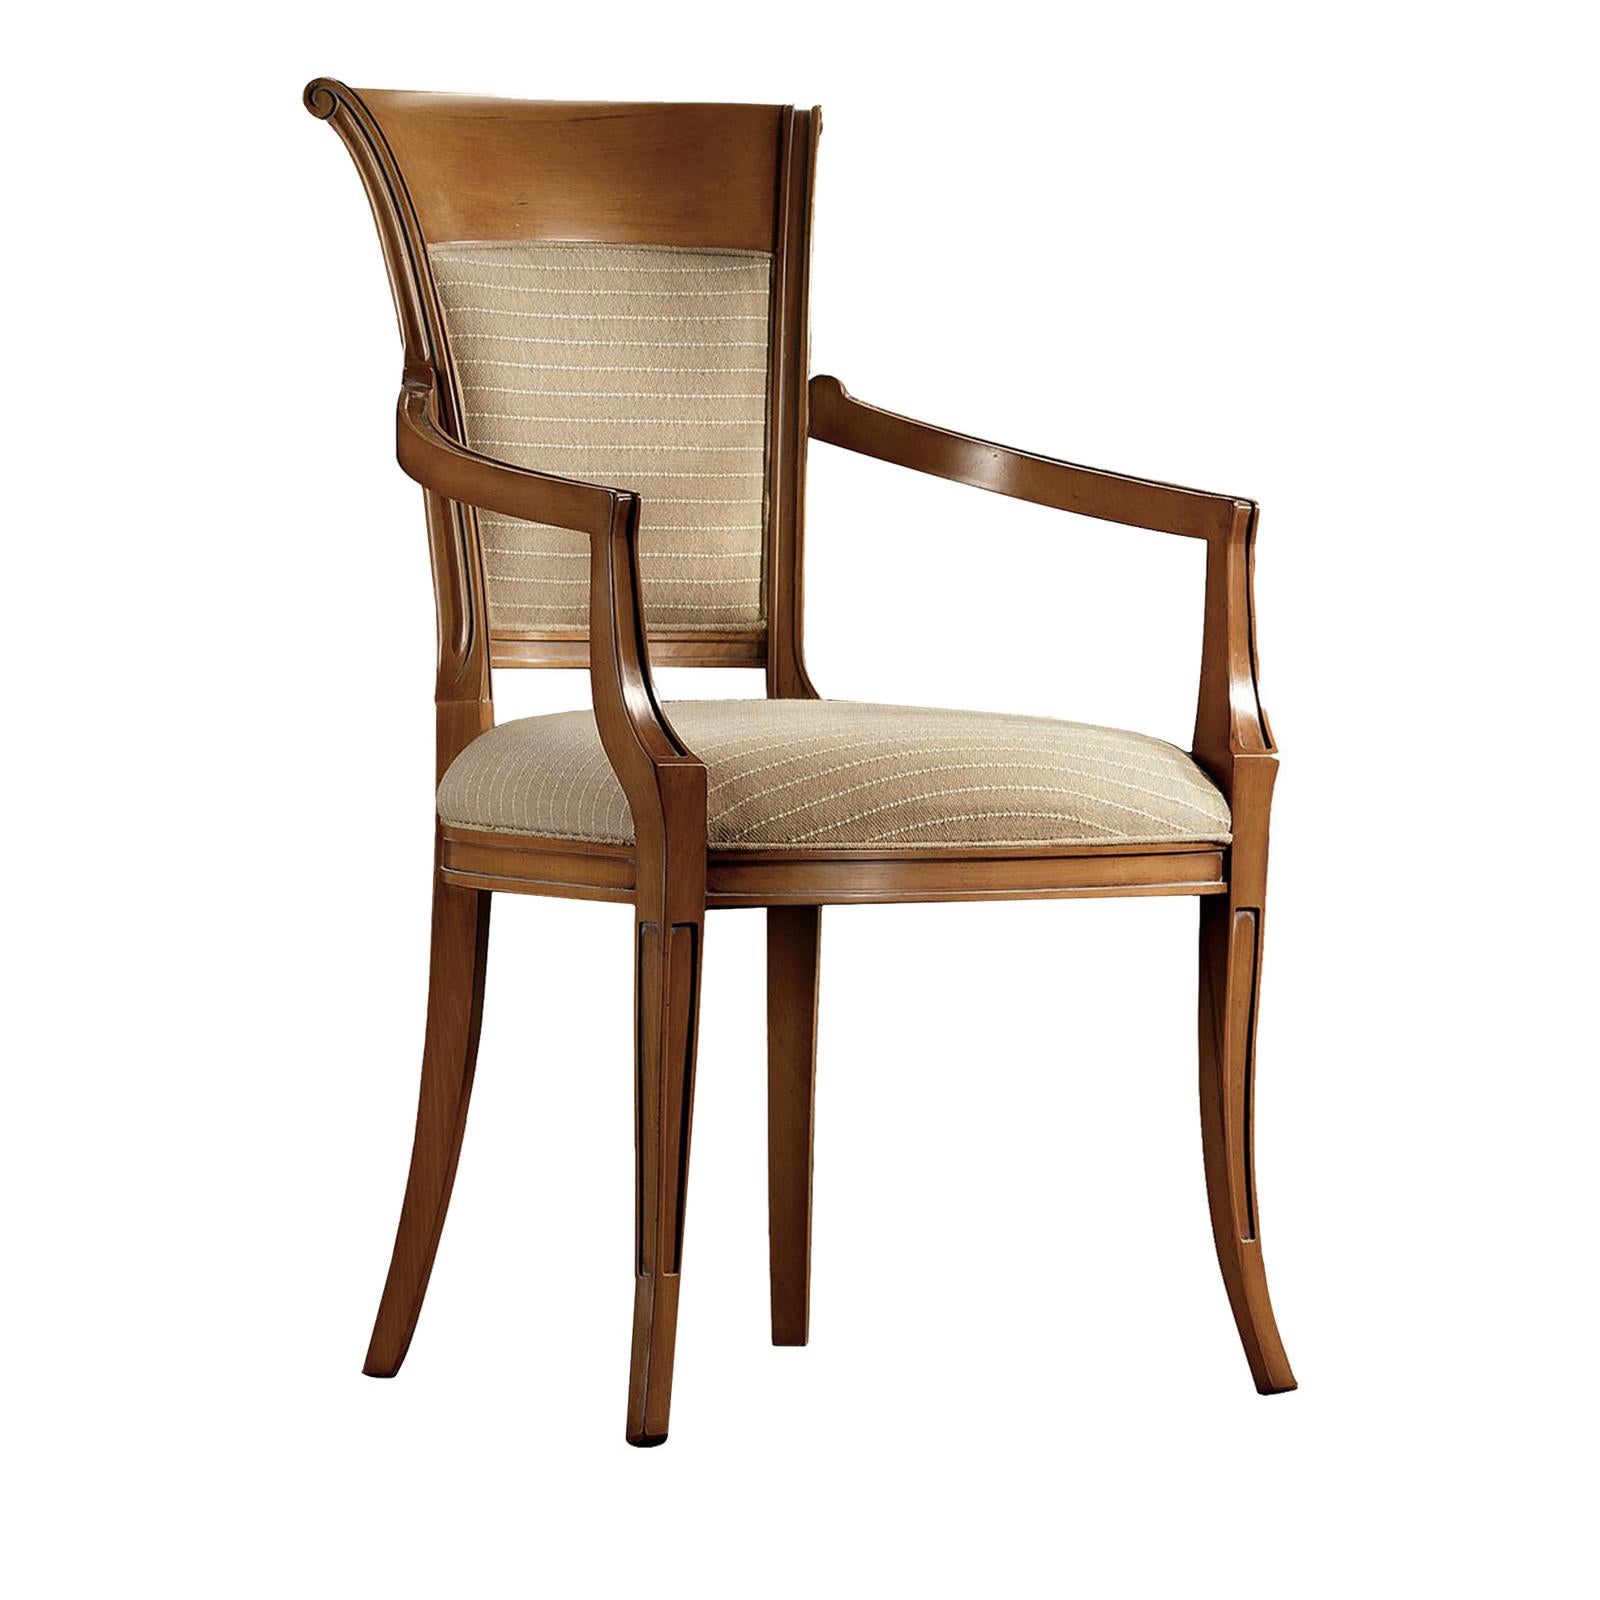 Ethereal and versatile, this rustic-inspired chair boasts 18th century aesthetic balance and charm. Entirely made of wood with a natural finish, this chair is distinguished for its Classic lines and tapered Silhouette. The armrests, curved and